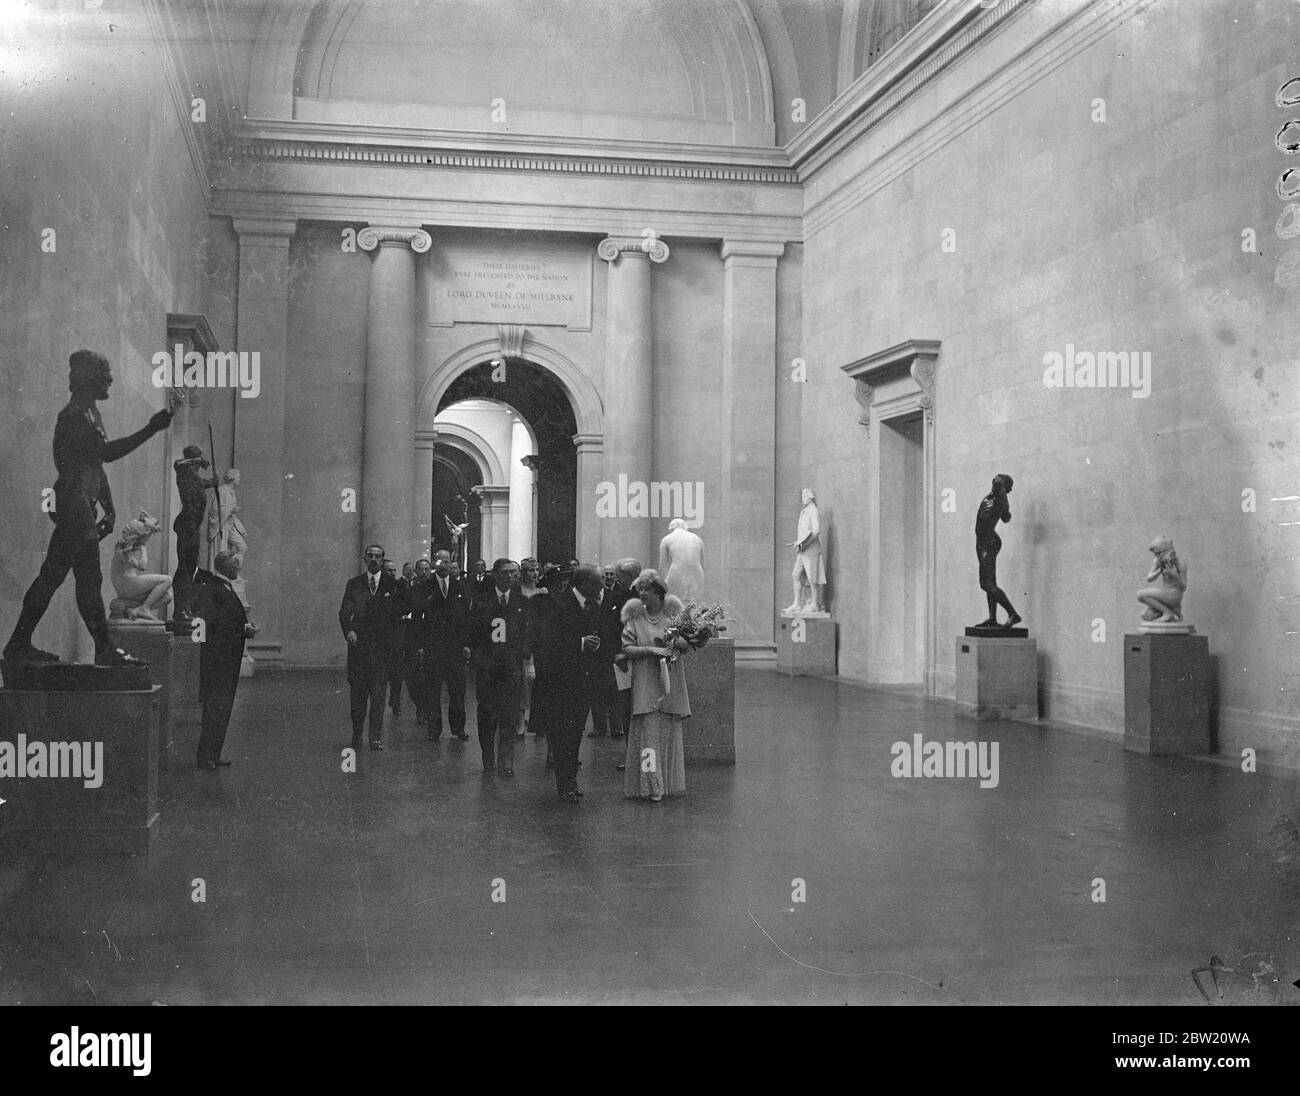 The new Tate Gallery which the King and Queen opened today (Tuesday). The sculpture gallery which was presented by Lord Duveen, gives an architectural vista nearly 500 feet long and is the greatest hall of sculpture in the world. The King and Queen inspecting the new sculpture hall. 29 June 1937 Stock Photo